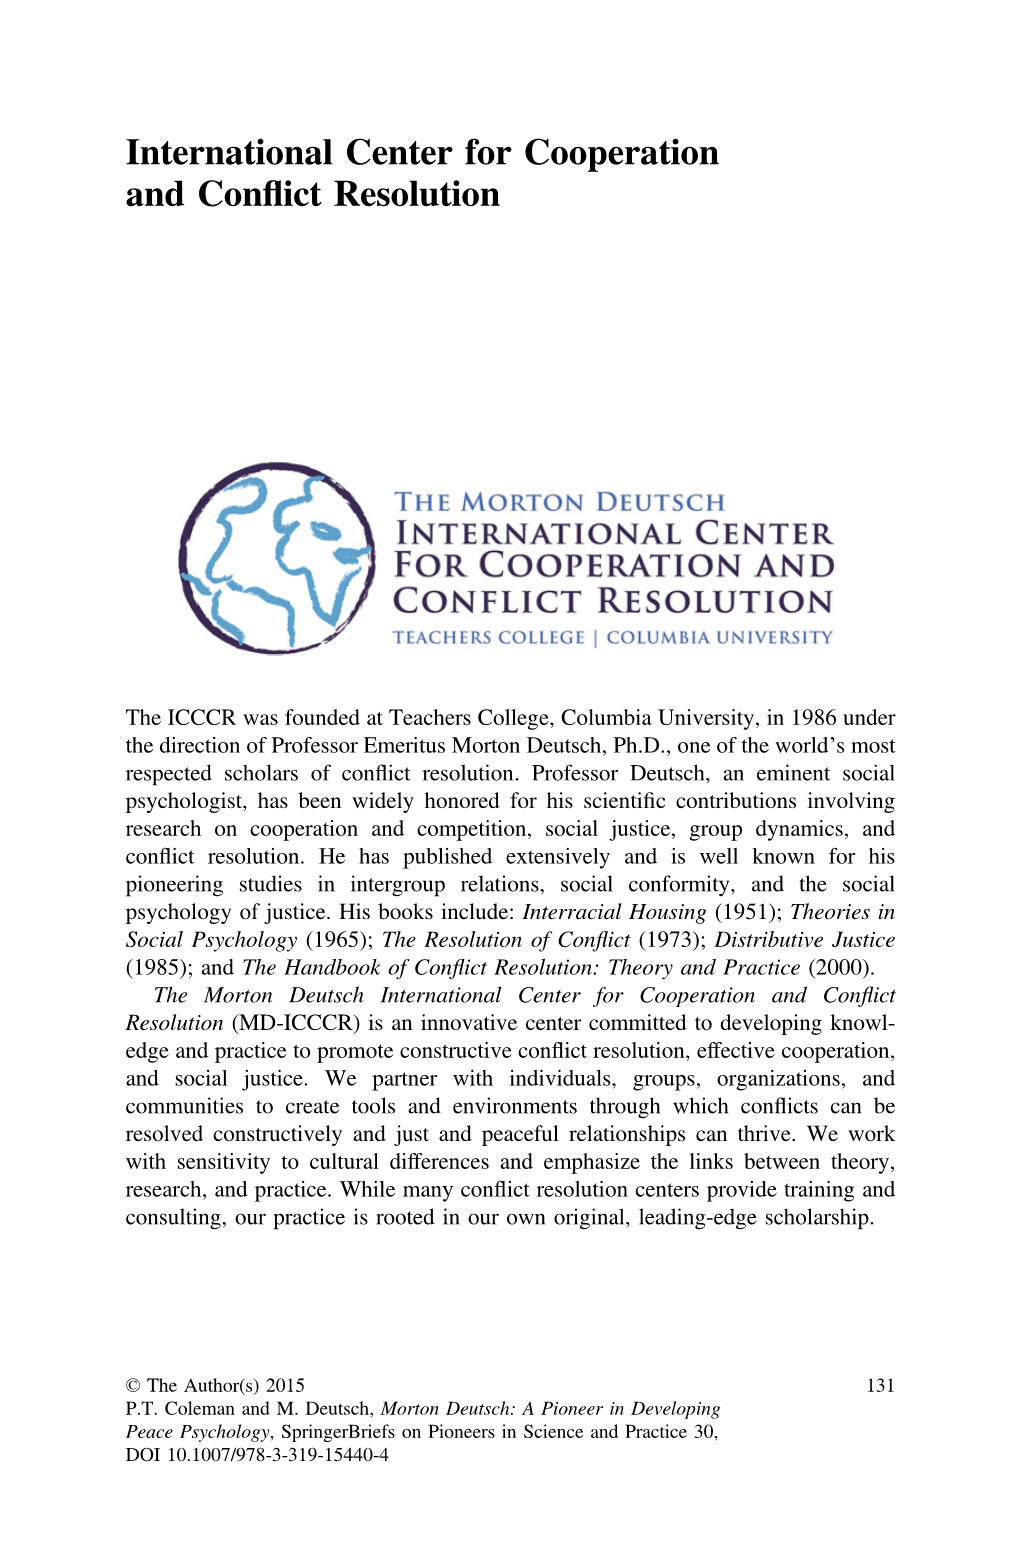 International Center for Cooperation and Conflict Resolution